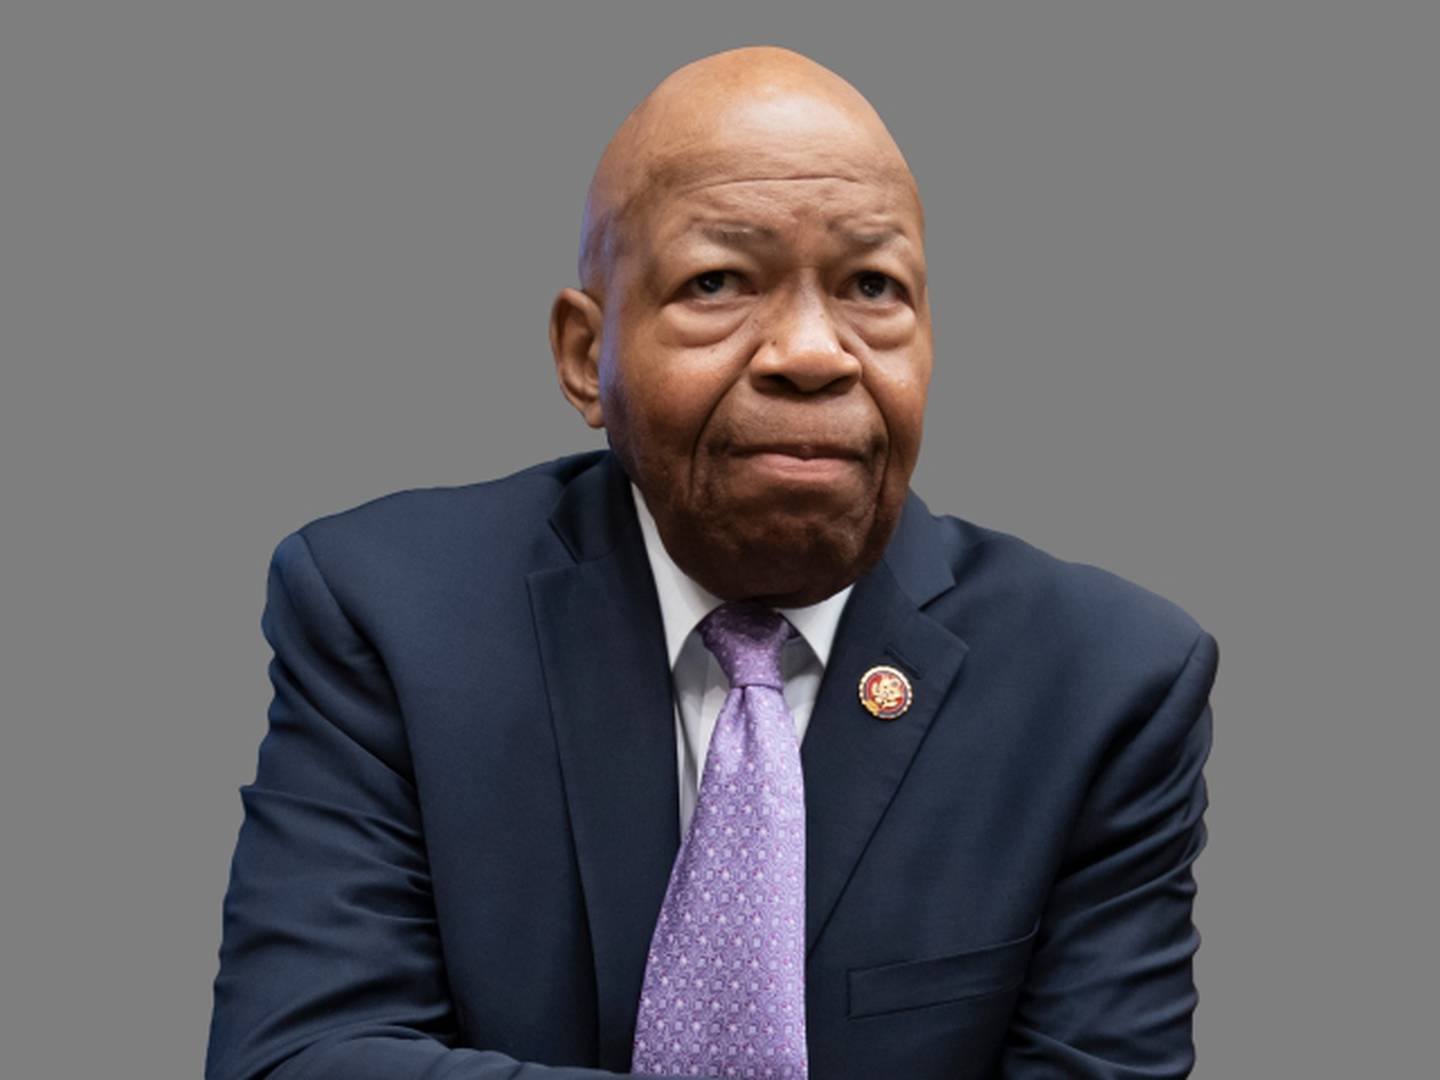 Elijah Cummings headshot, as US Representative of Maryland and House Oversight and Reform Committee Chair.